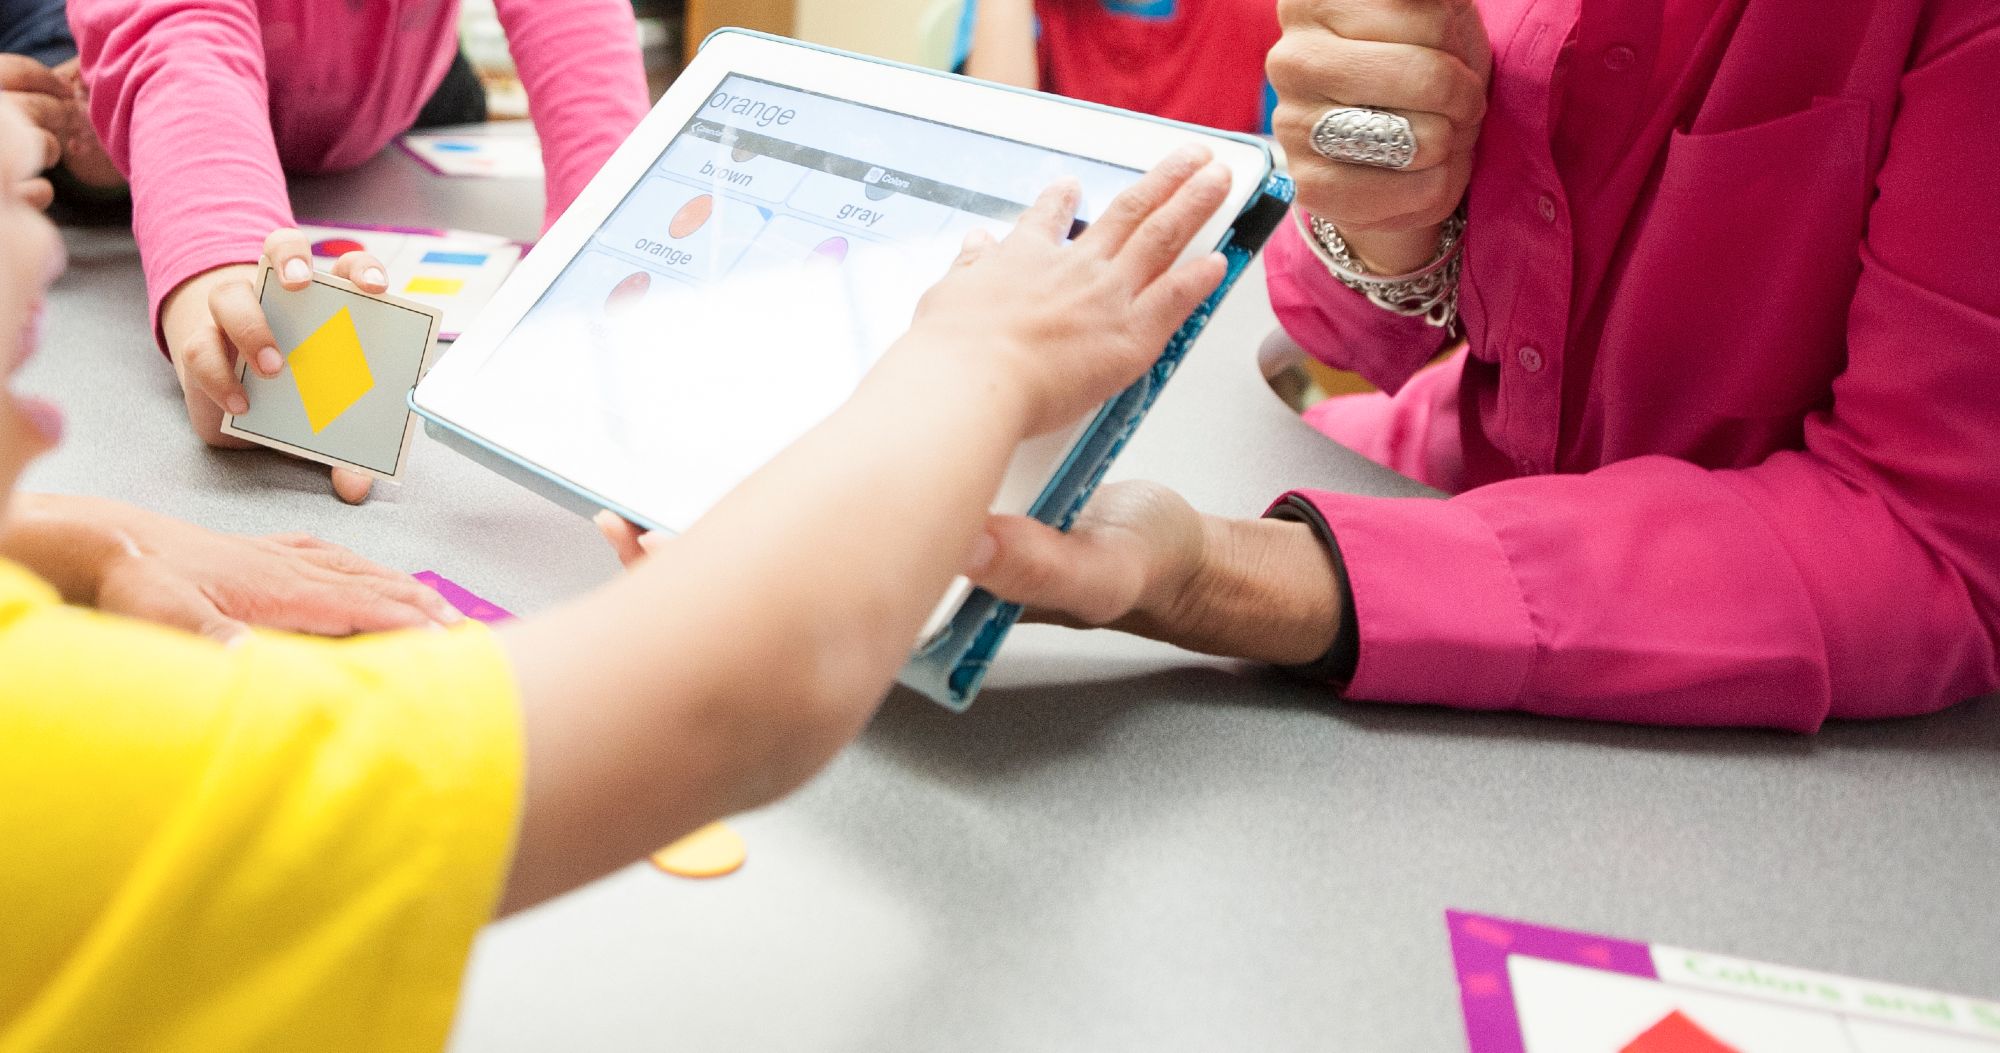 Students use iPads in classrooms